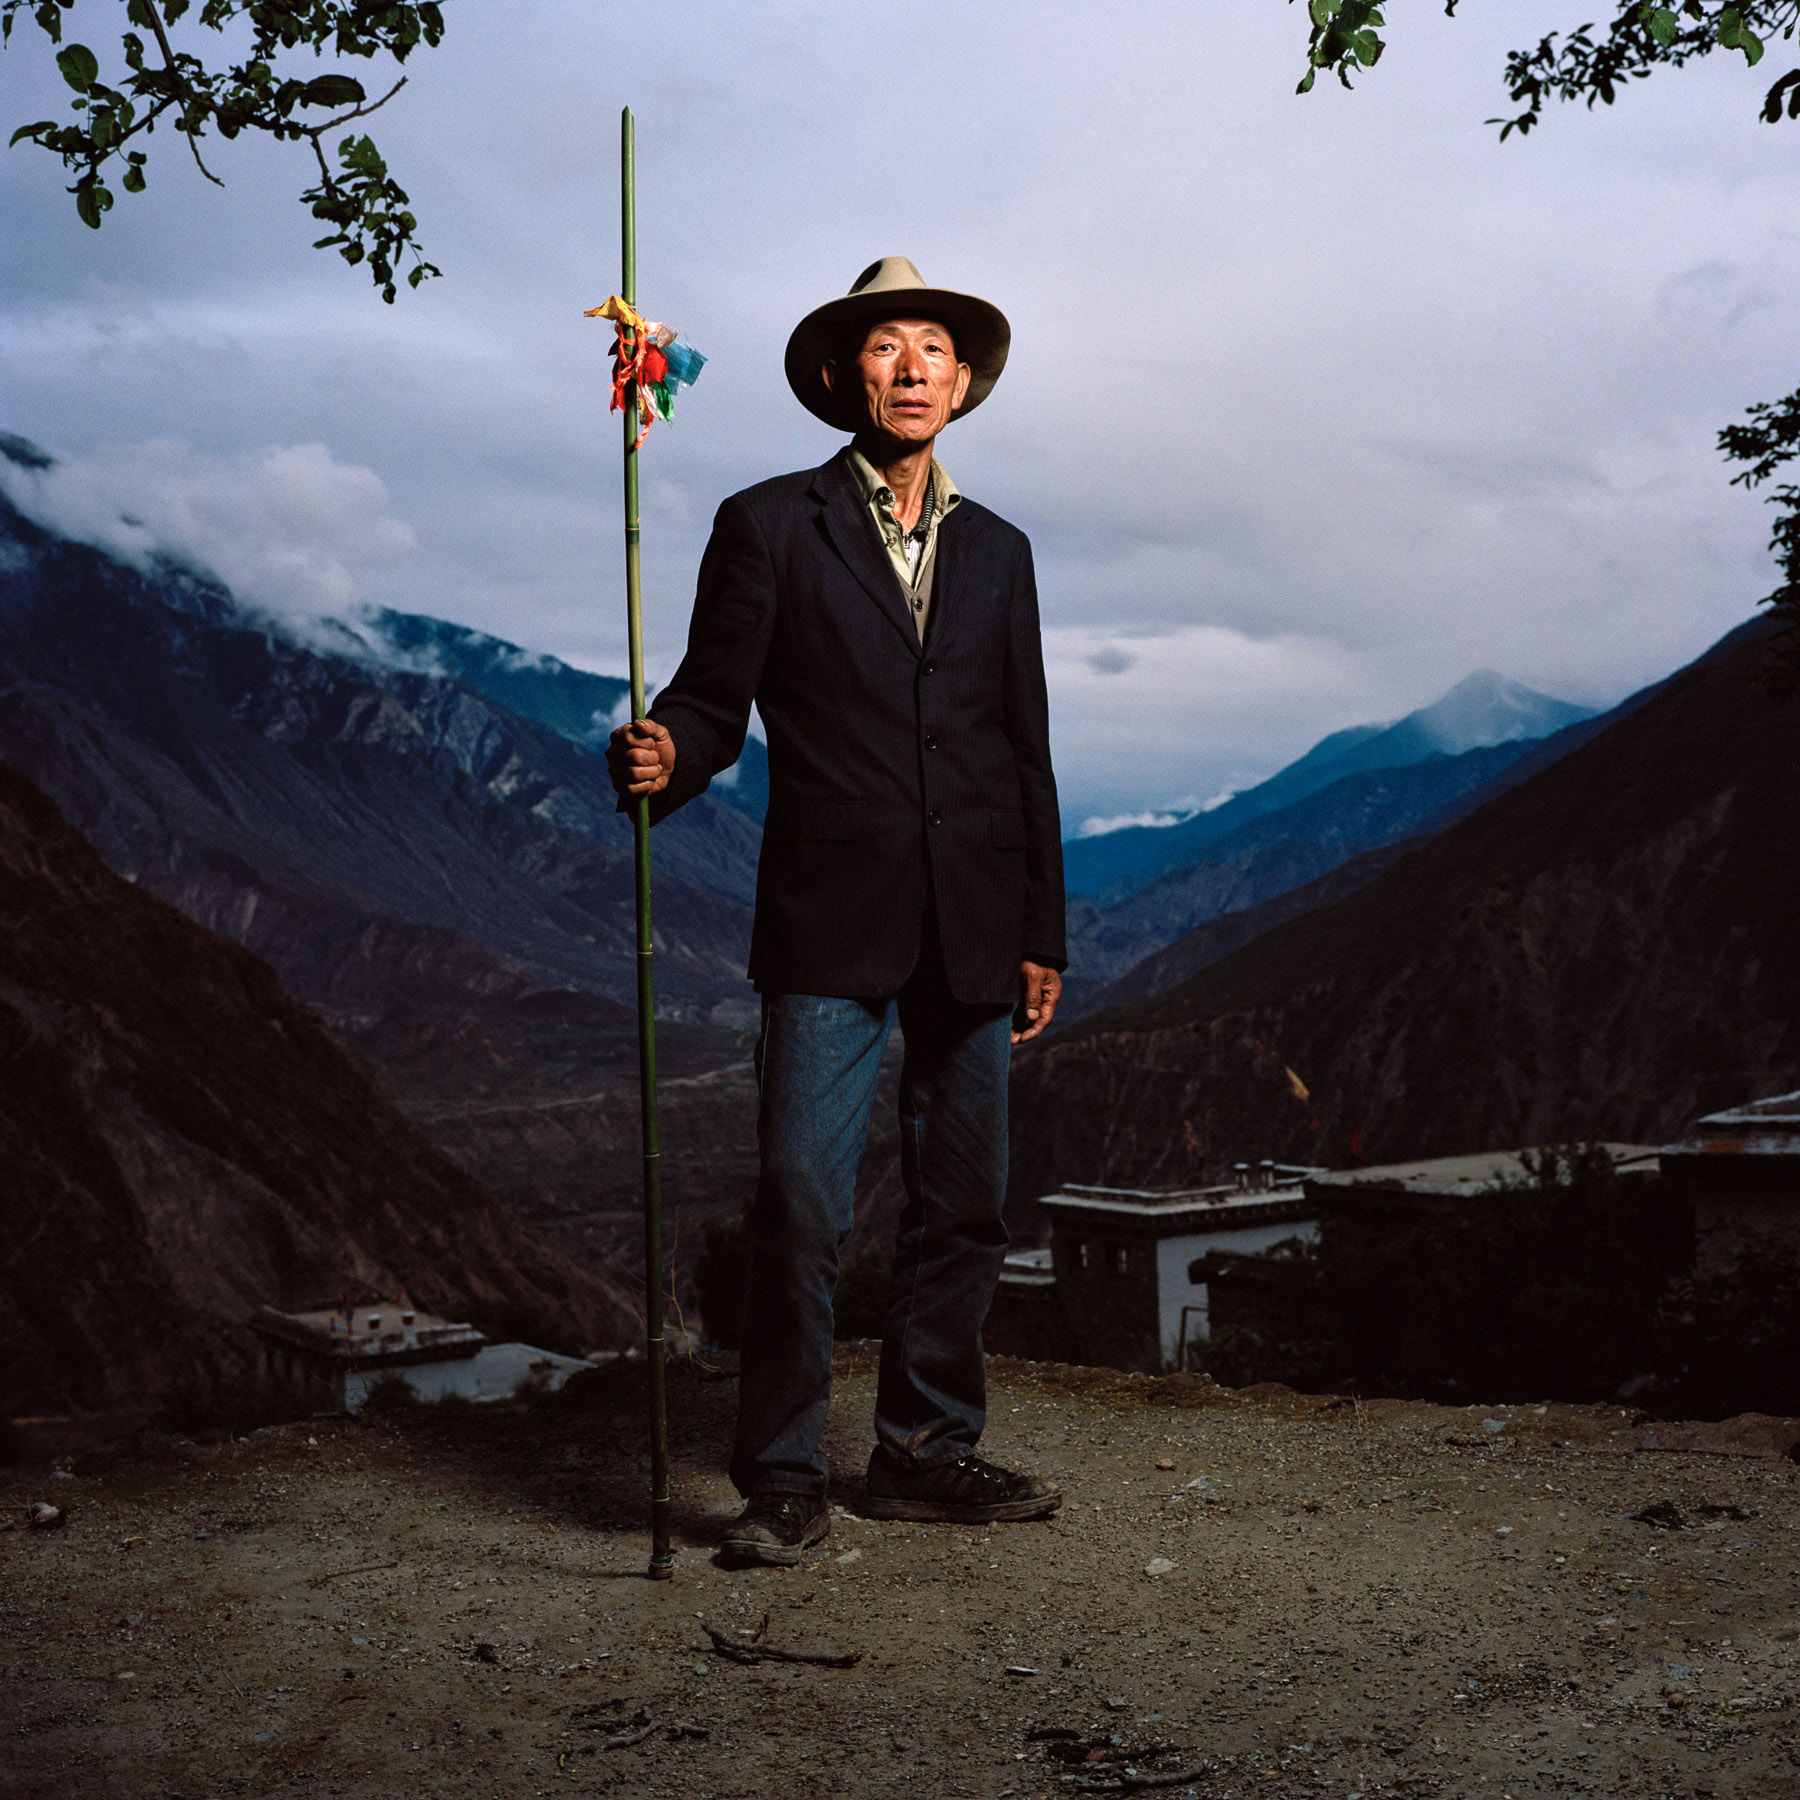  May 2012. Tibet province, China. Portrait of Jiangzu, 59 years old, Tibetan forest ranger near the village of Zina Yongpo at 2150m high, on the trail of the buddhist pilgrimage of the Kawa Karpo. 